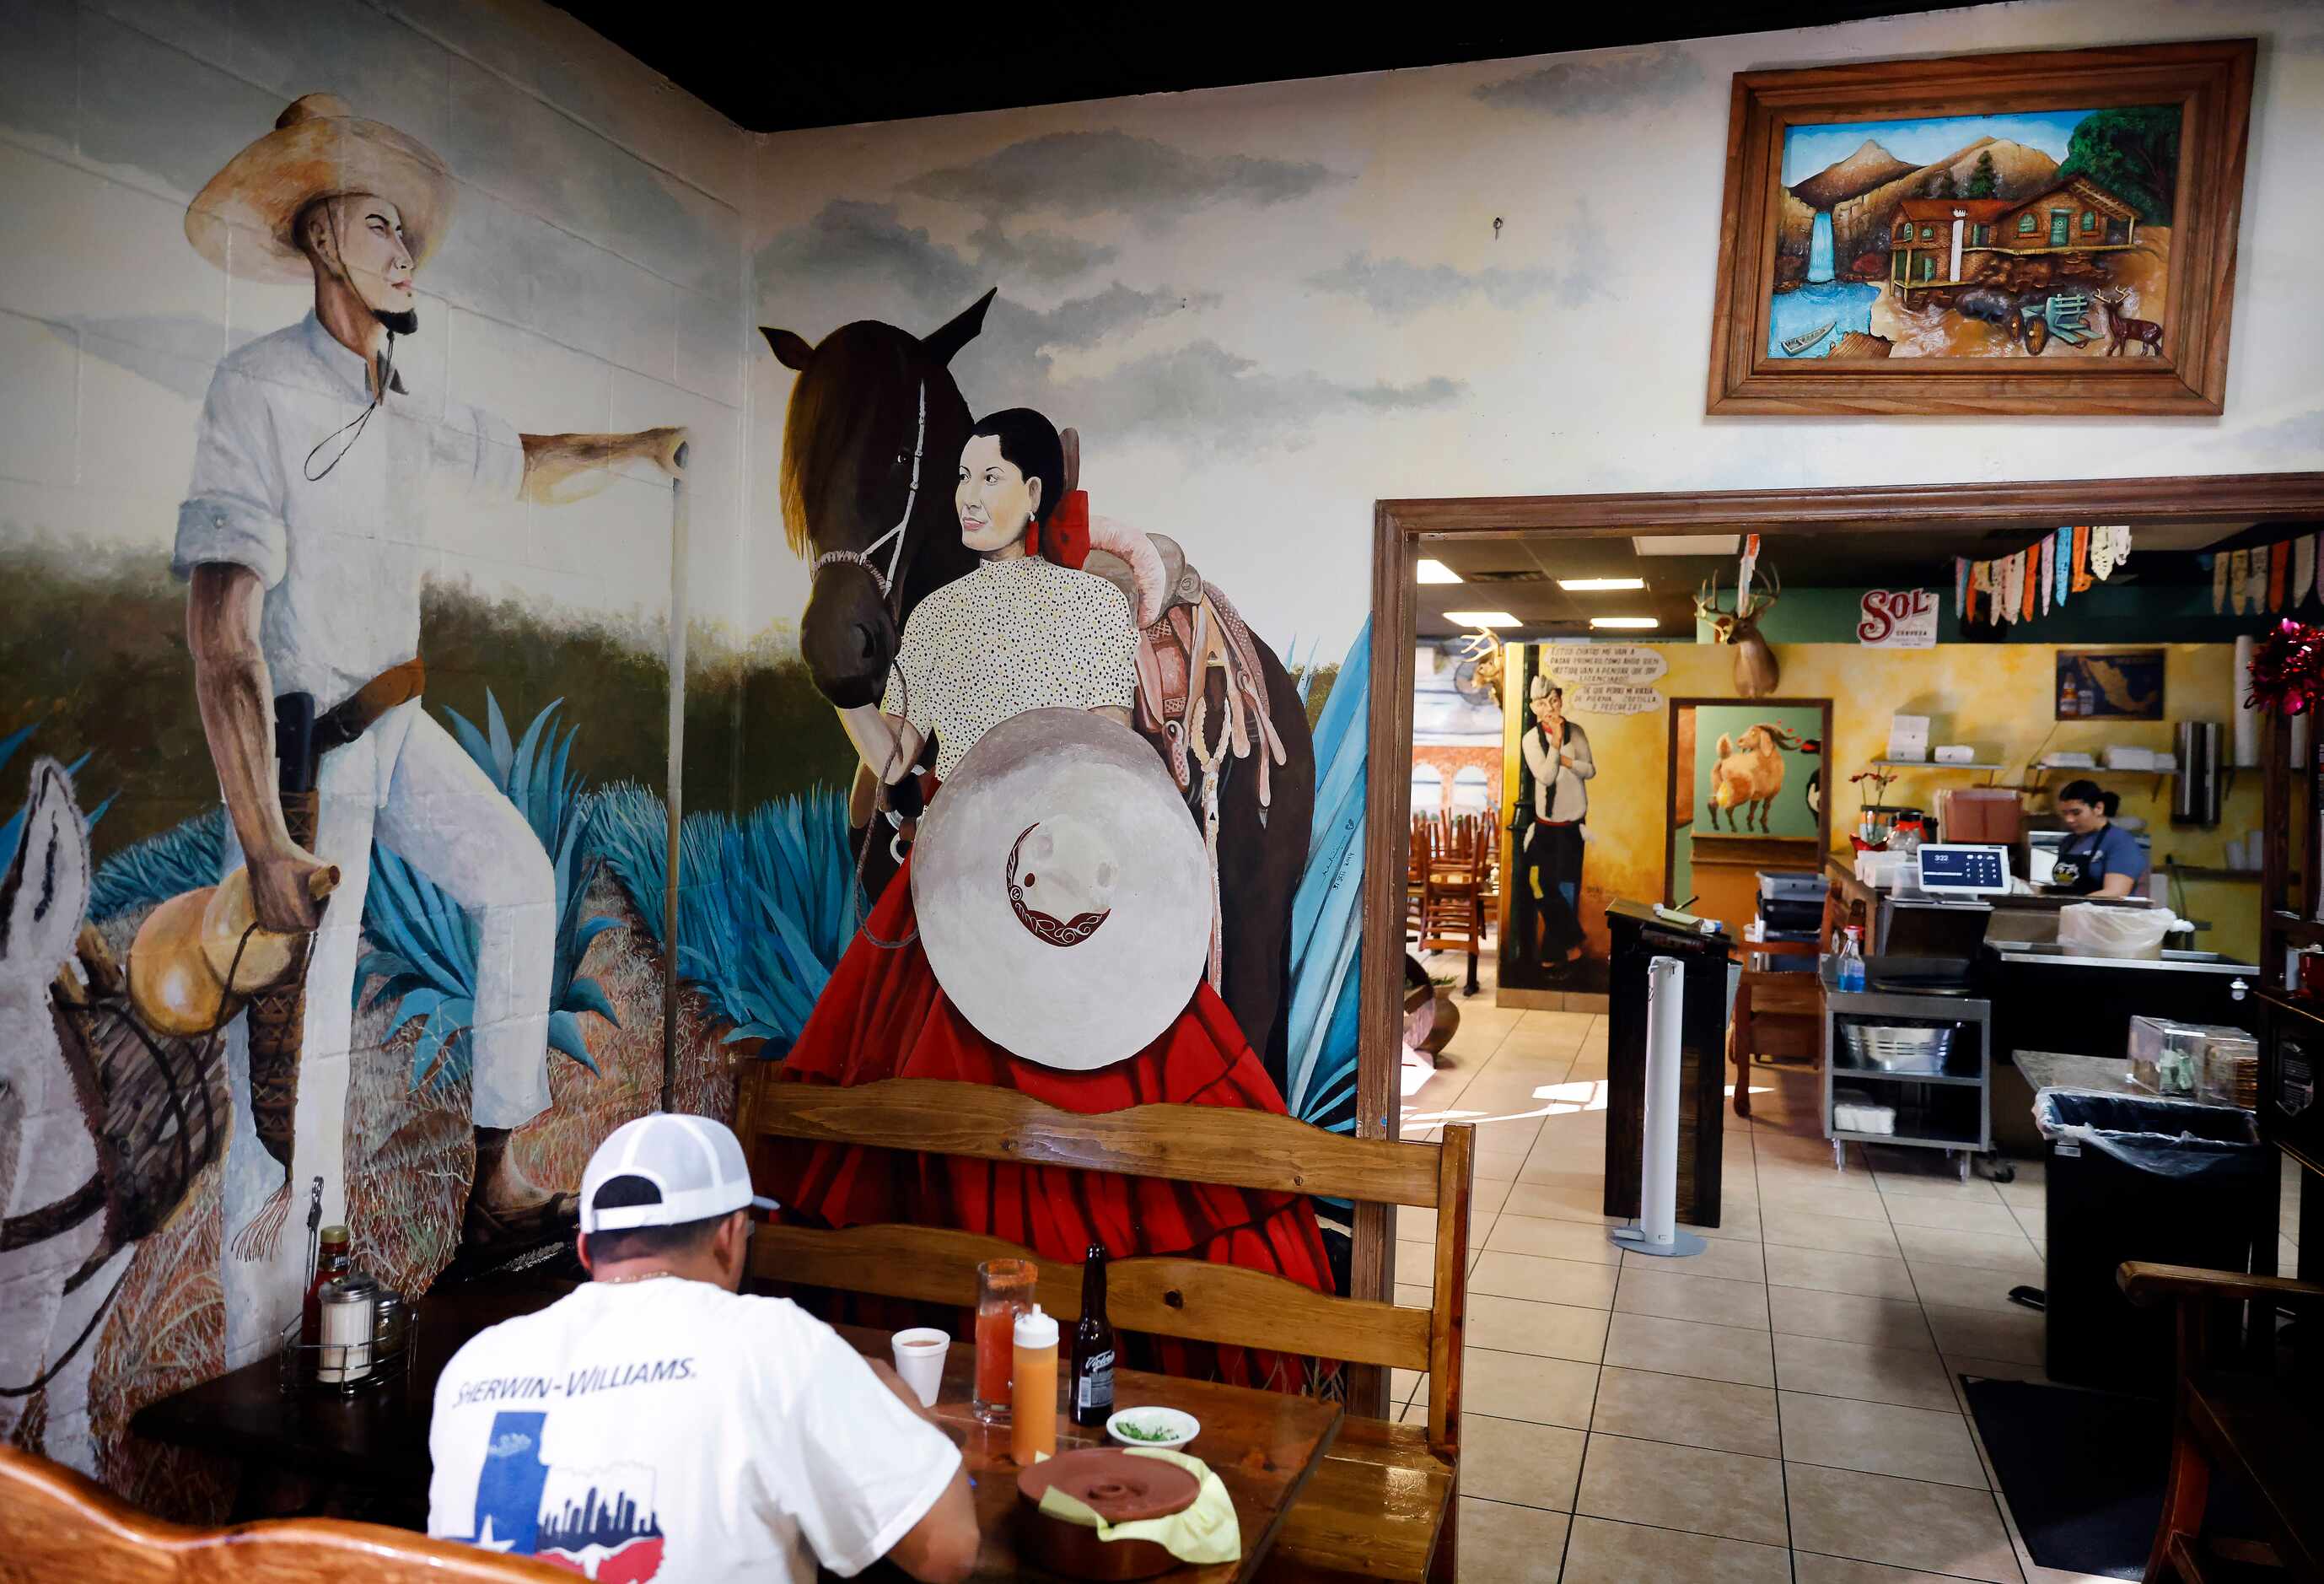 Fort Worth artist Elio Martinez from Oaxaca, México has painted several Mexican scene and...